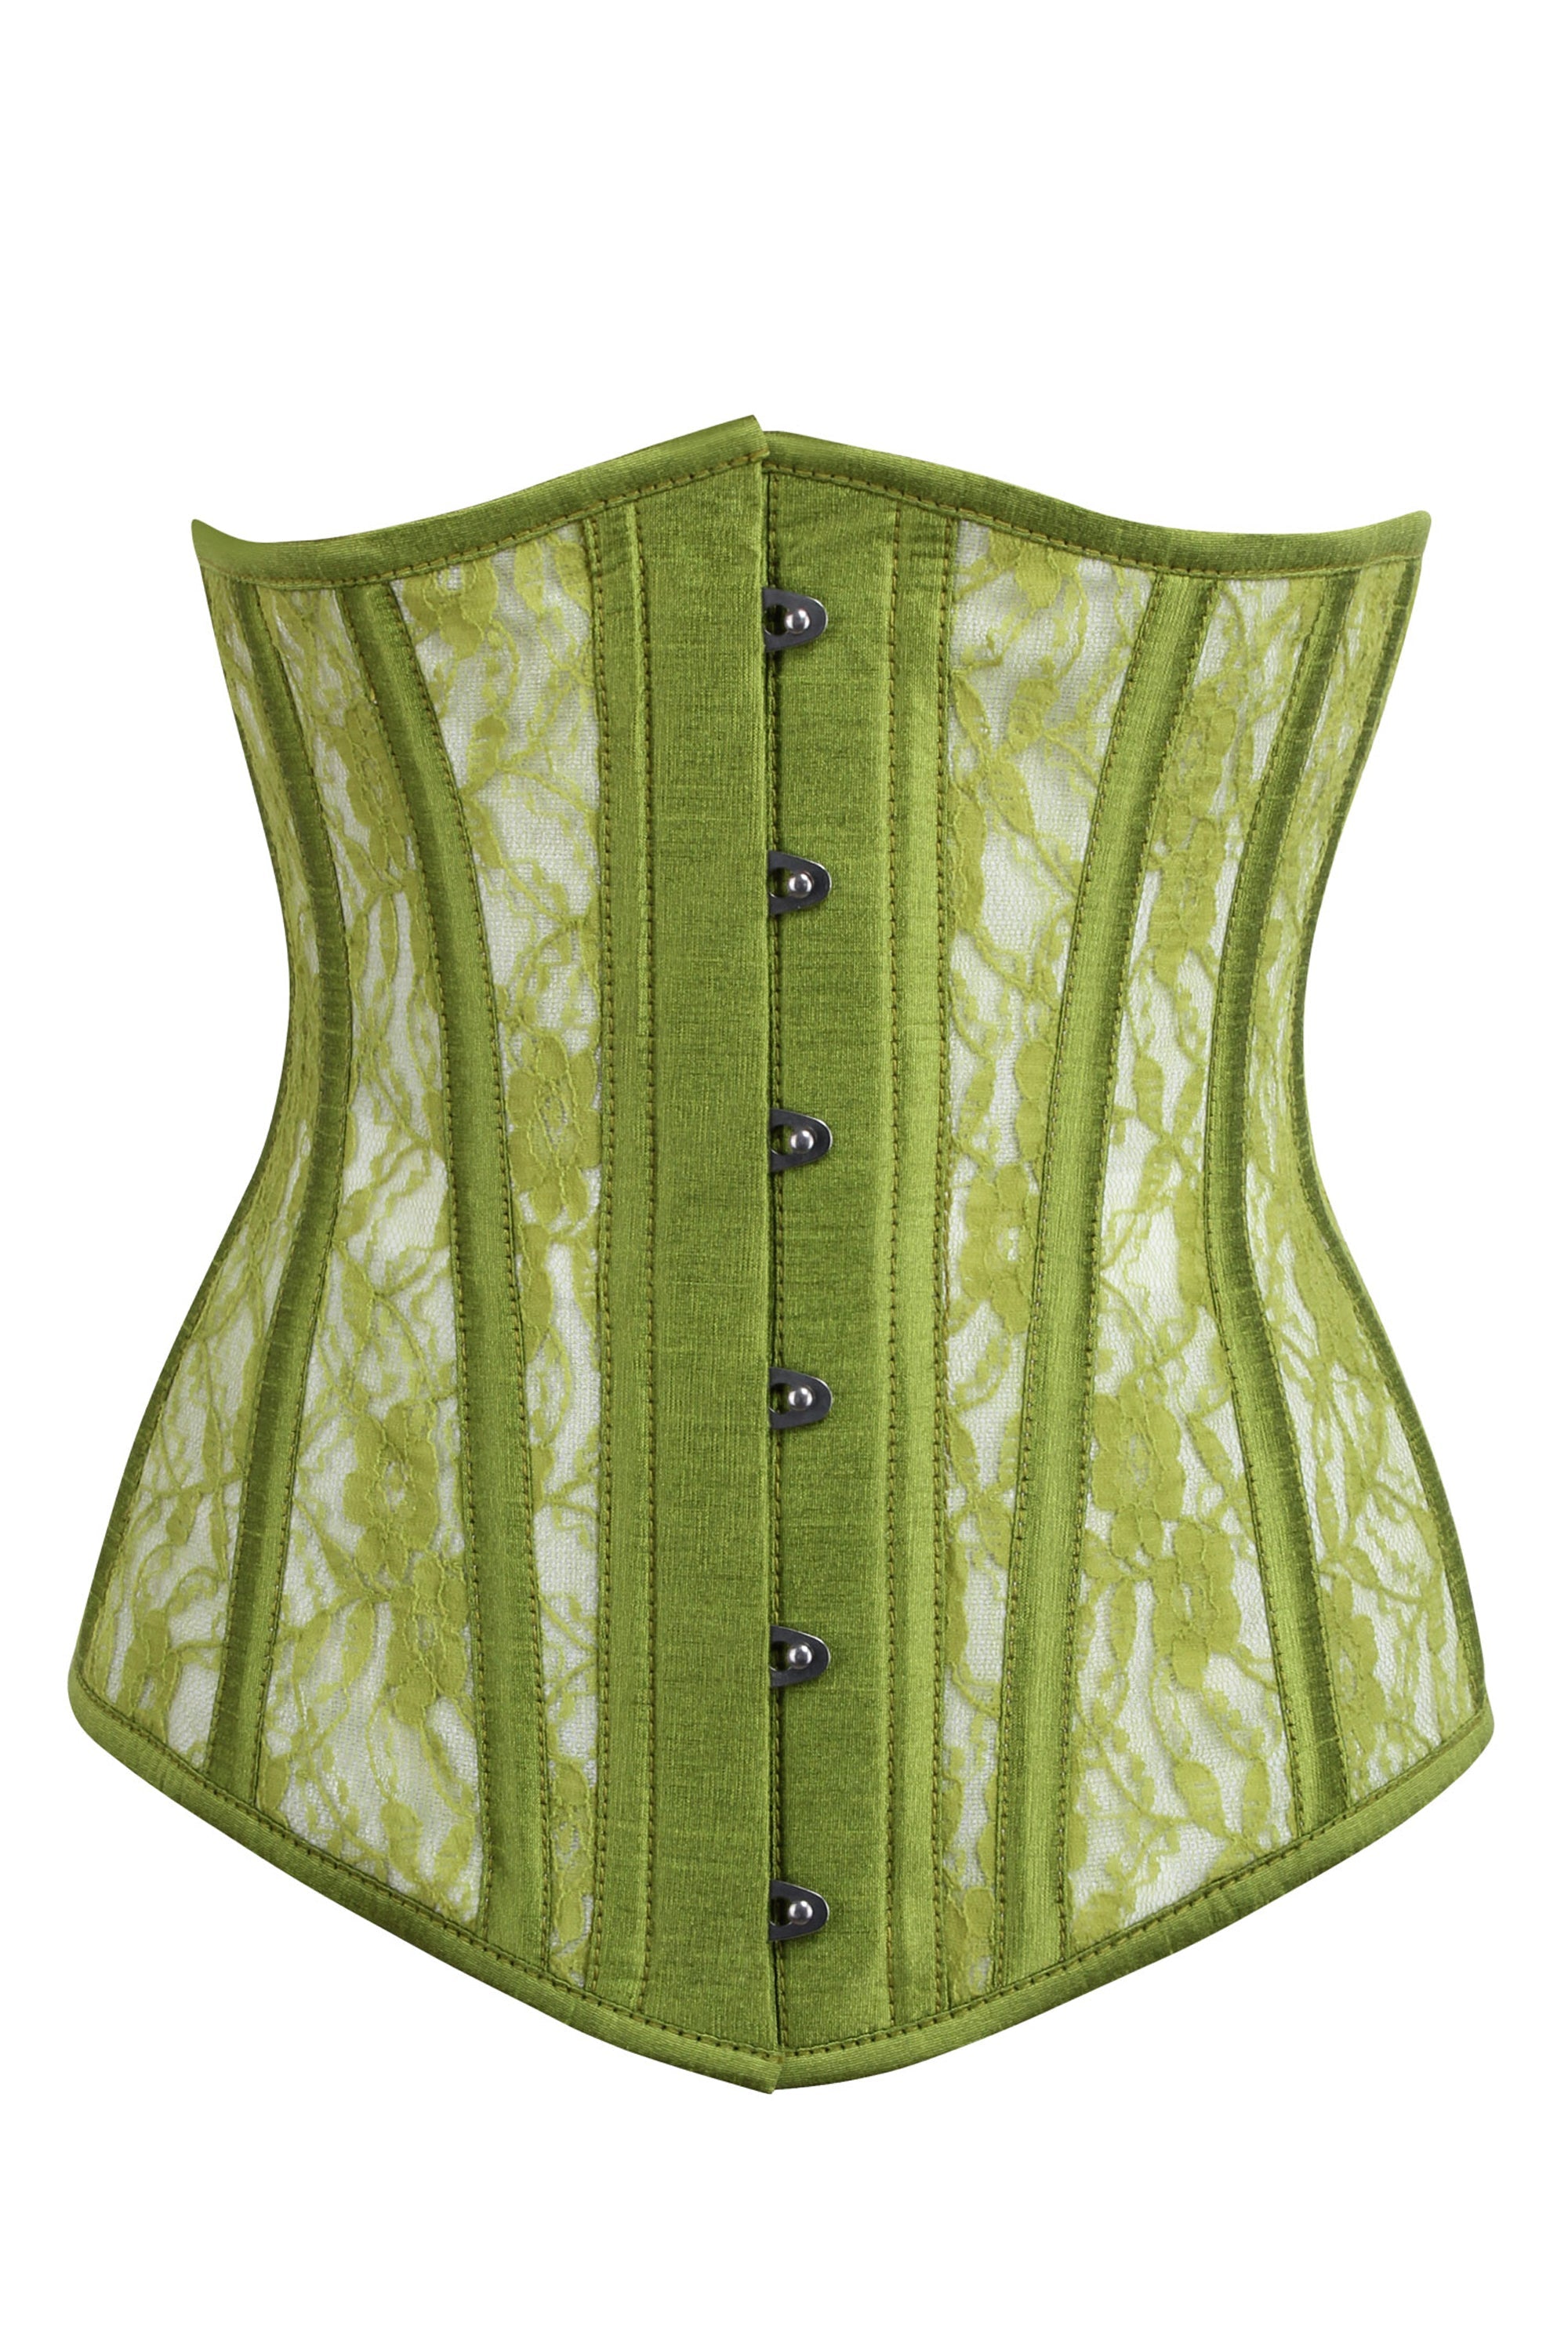 Longline Green Mesh Underbust Corset with Floral Lace